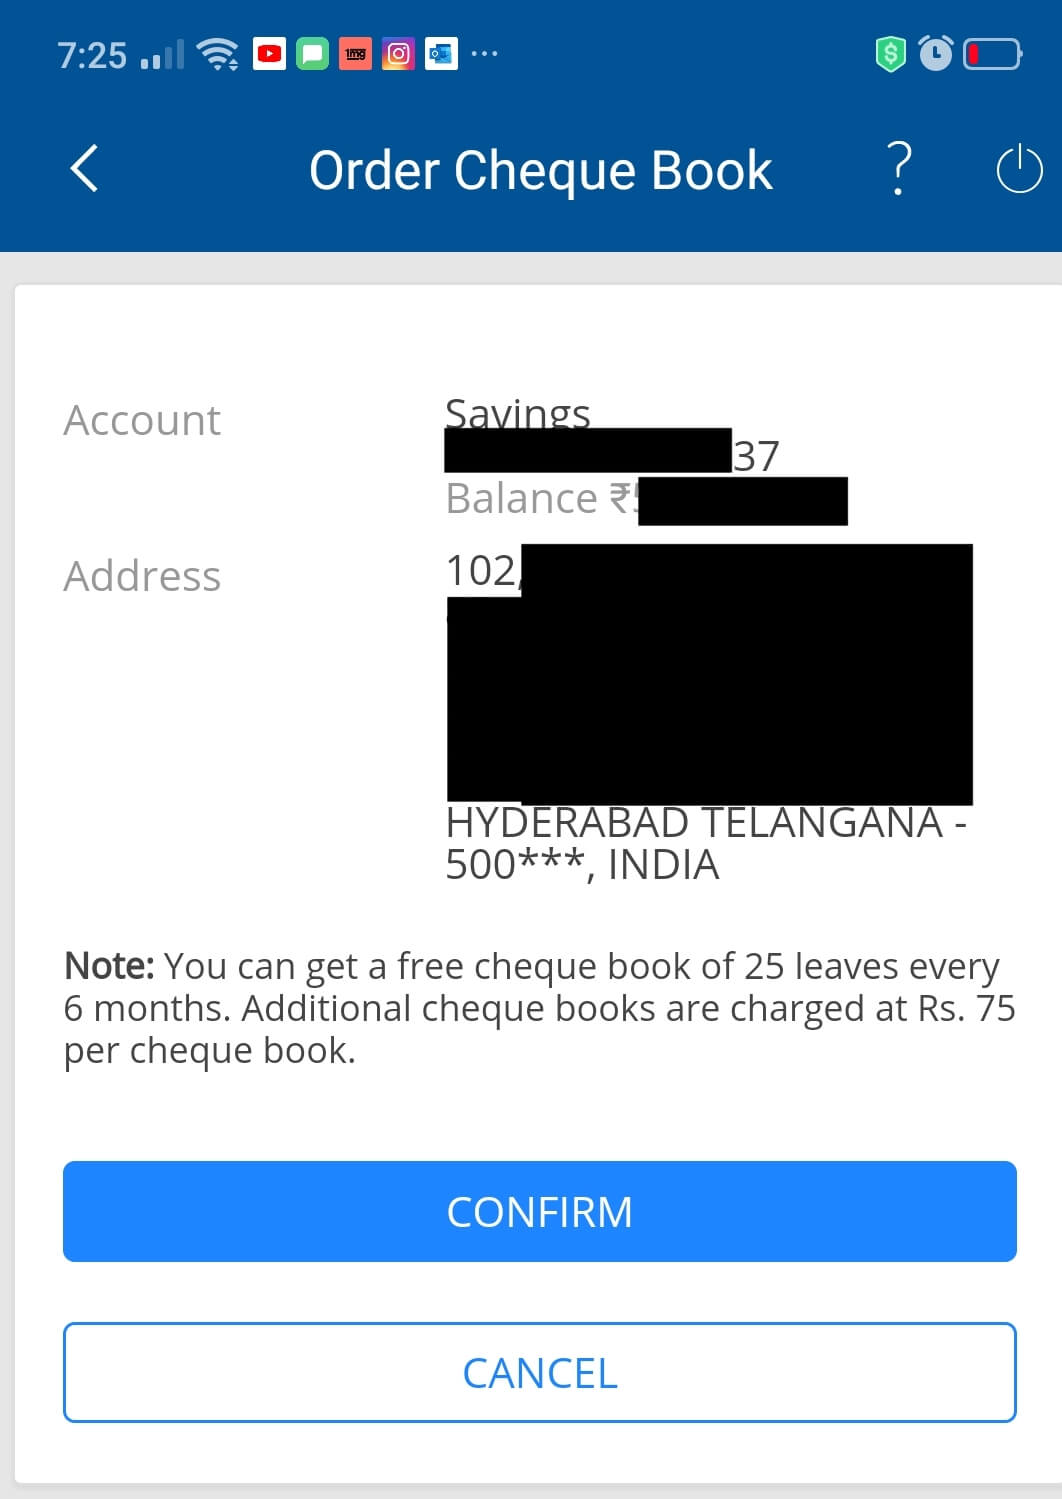 HDFC Cheque Book Request - With Smartphone App